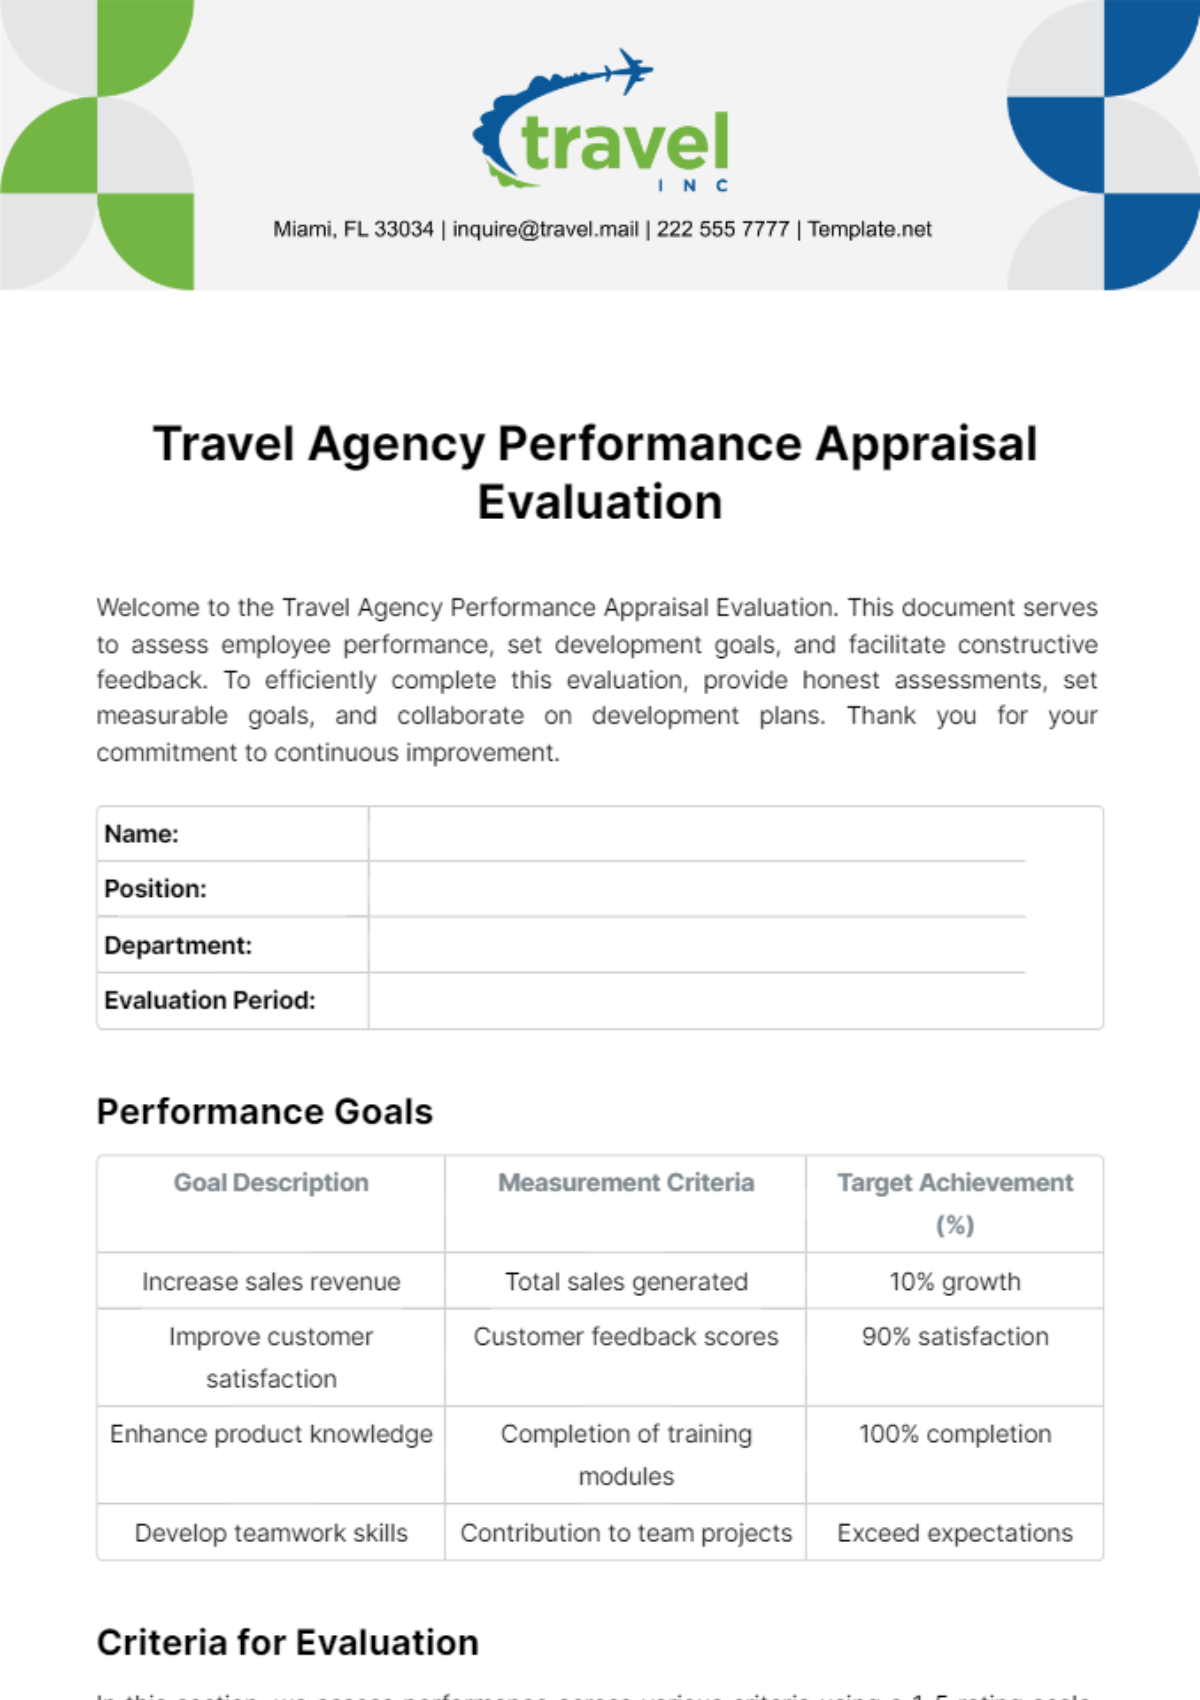 Travel Agency Performance Appraisal Evaluation Template